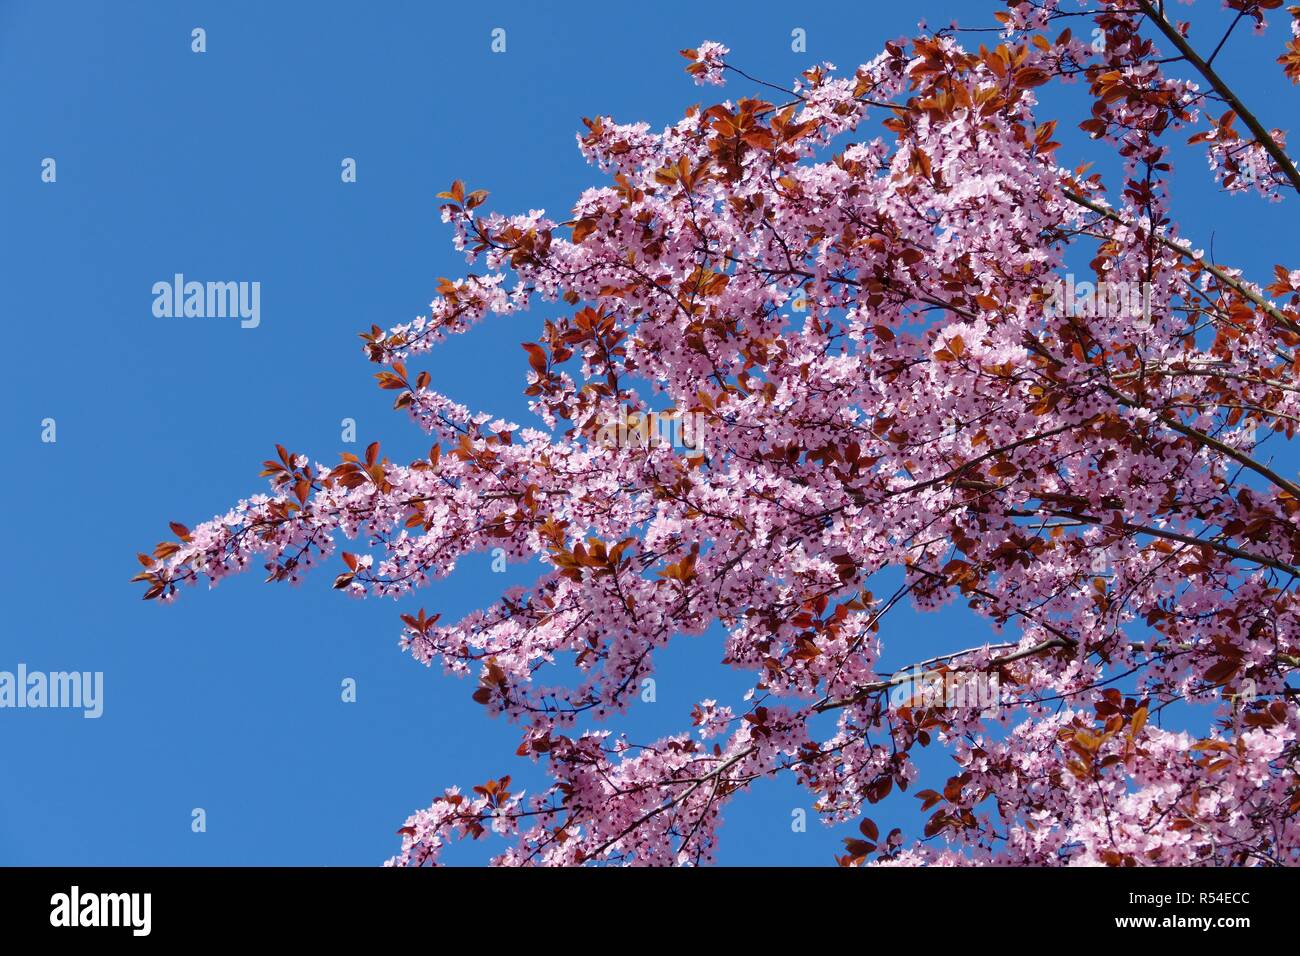 Blutpflaume hi-res stock Alamy and - photography images